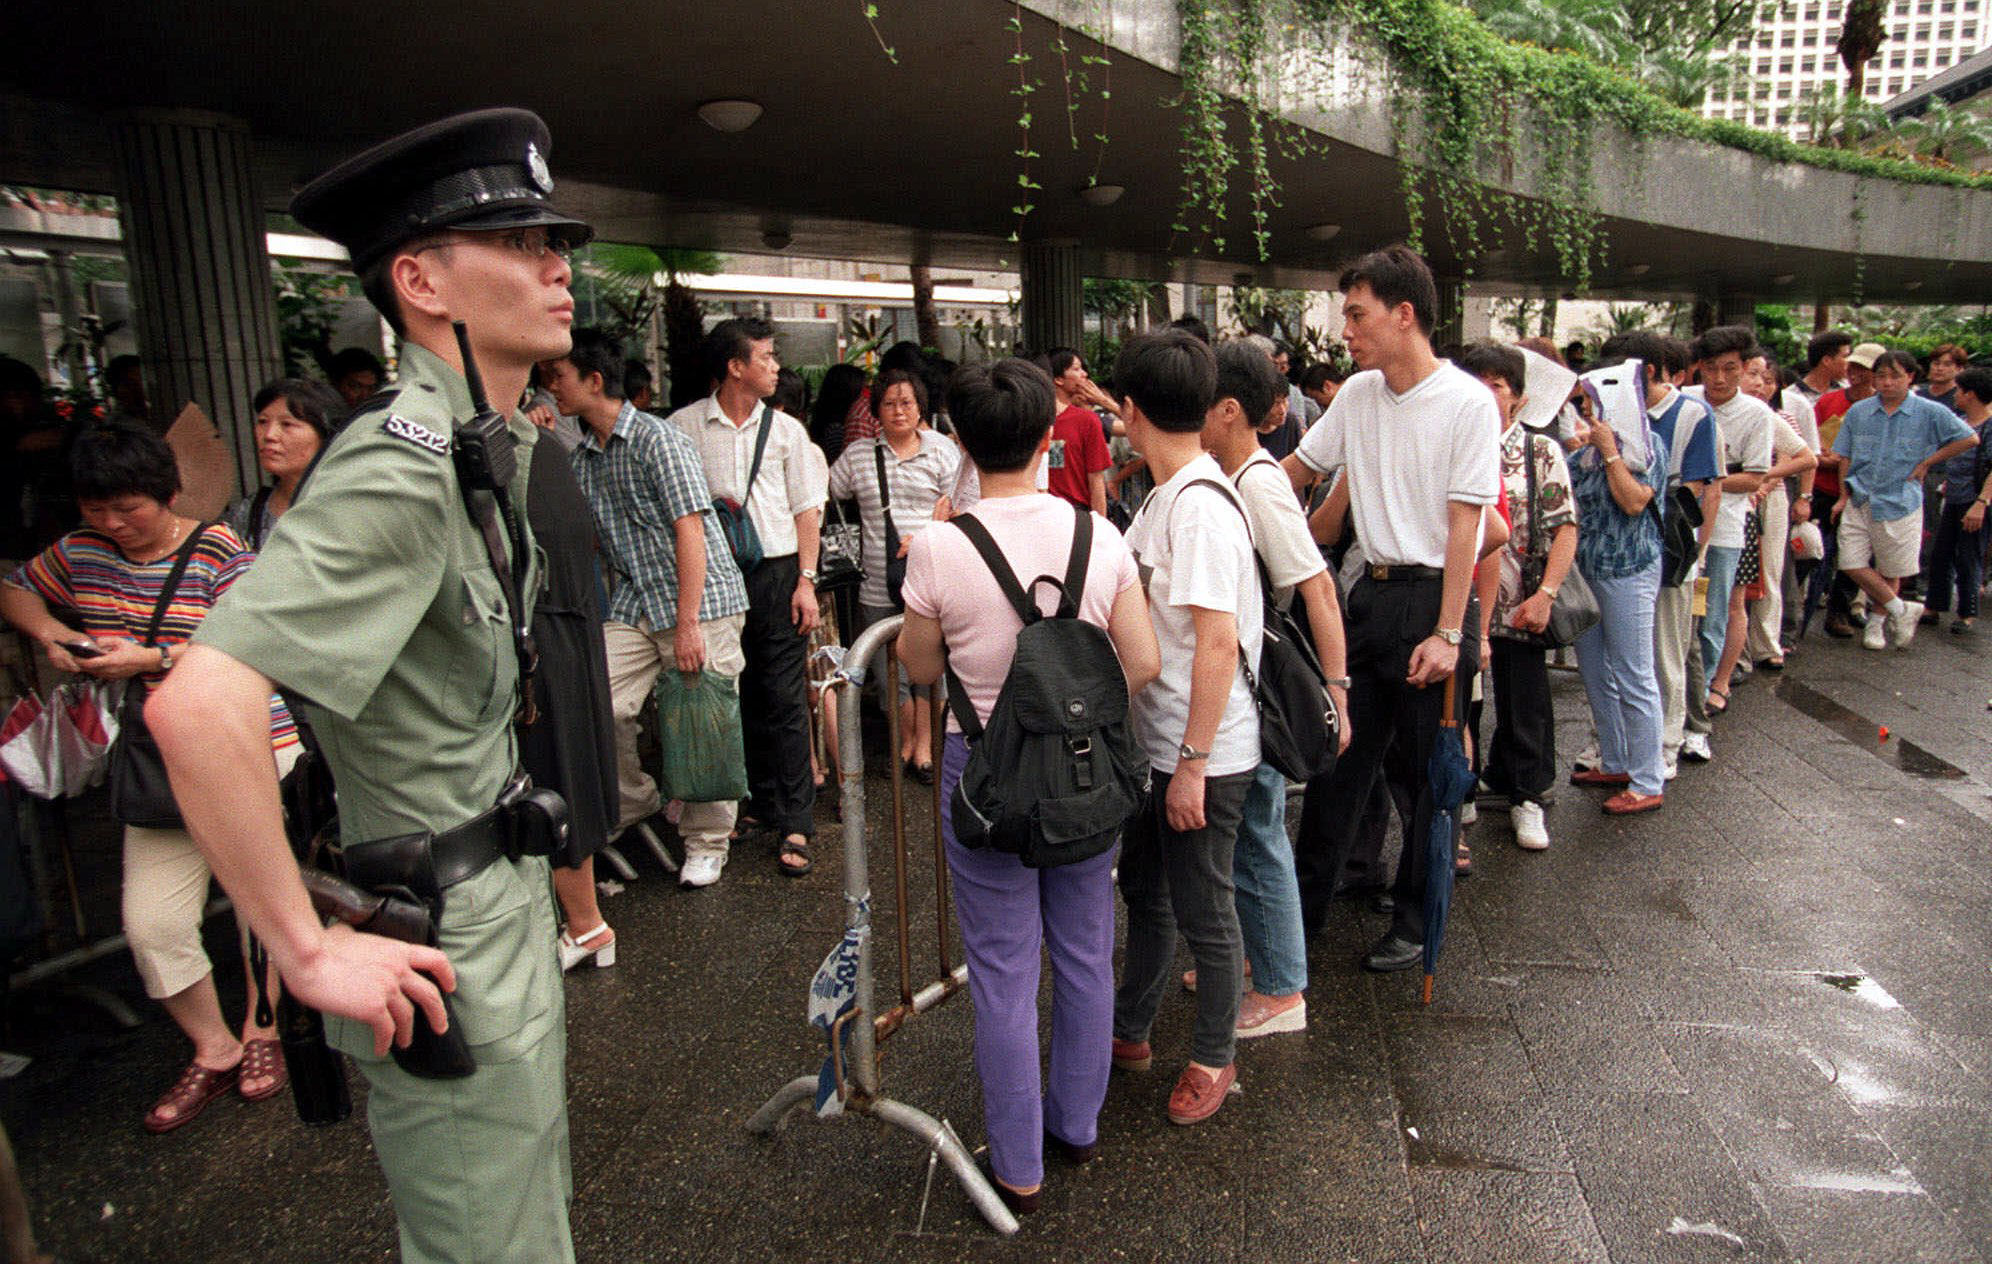 Mainland Chinese immigrants line up outside Hong Kong's Legislative Council building on July 8, 1999, to register their information to appeal for their residency rights in Hong Kong after the People's National Congress in Beijing provided a new interpretation of the Basic law. A Chief Judge admitted recent events in the right-of-abode affair had created confusion and he was unable to deal with a case of a mainland-born woman claiming the right to stay, the first to come before the court of Appeals since the re-interpretation of the Basic Law.